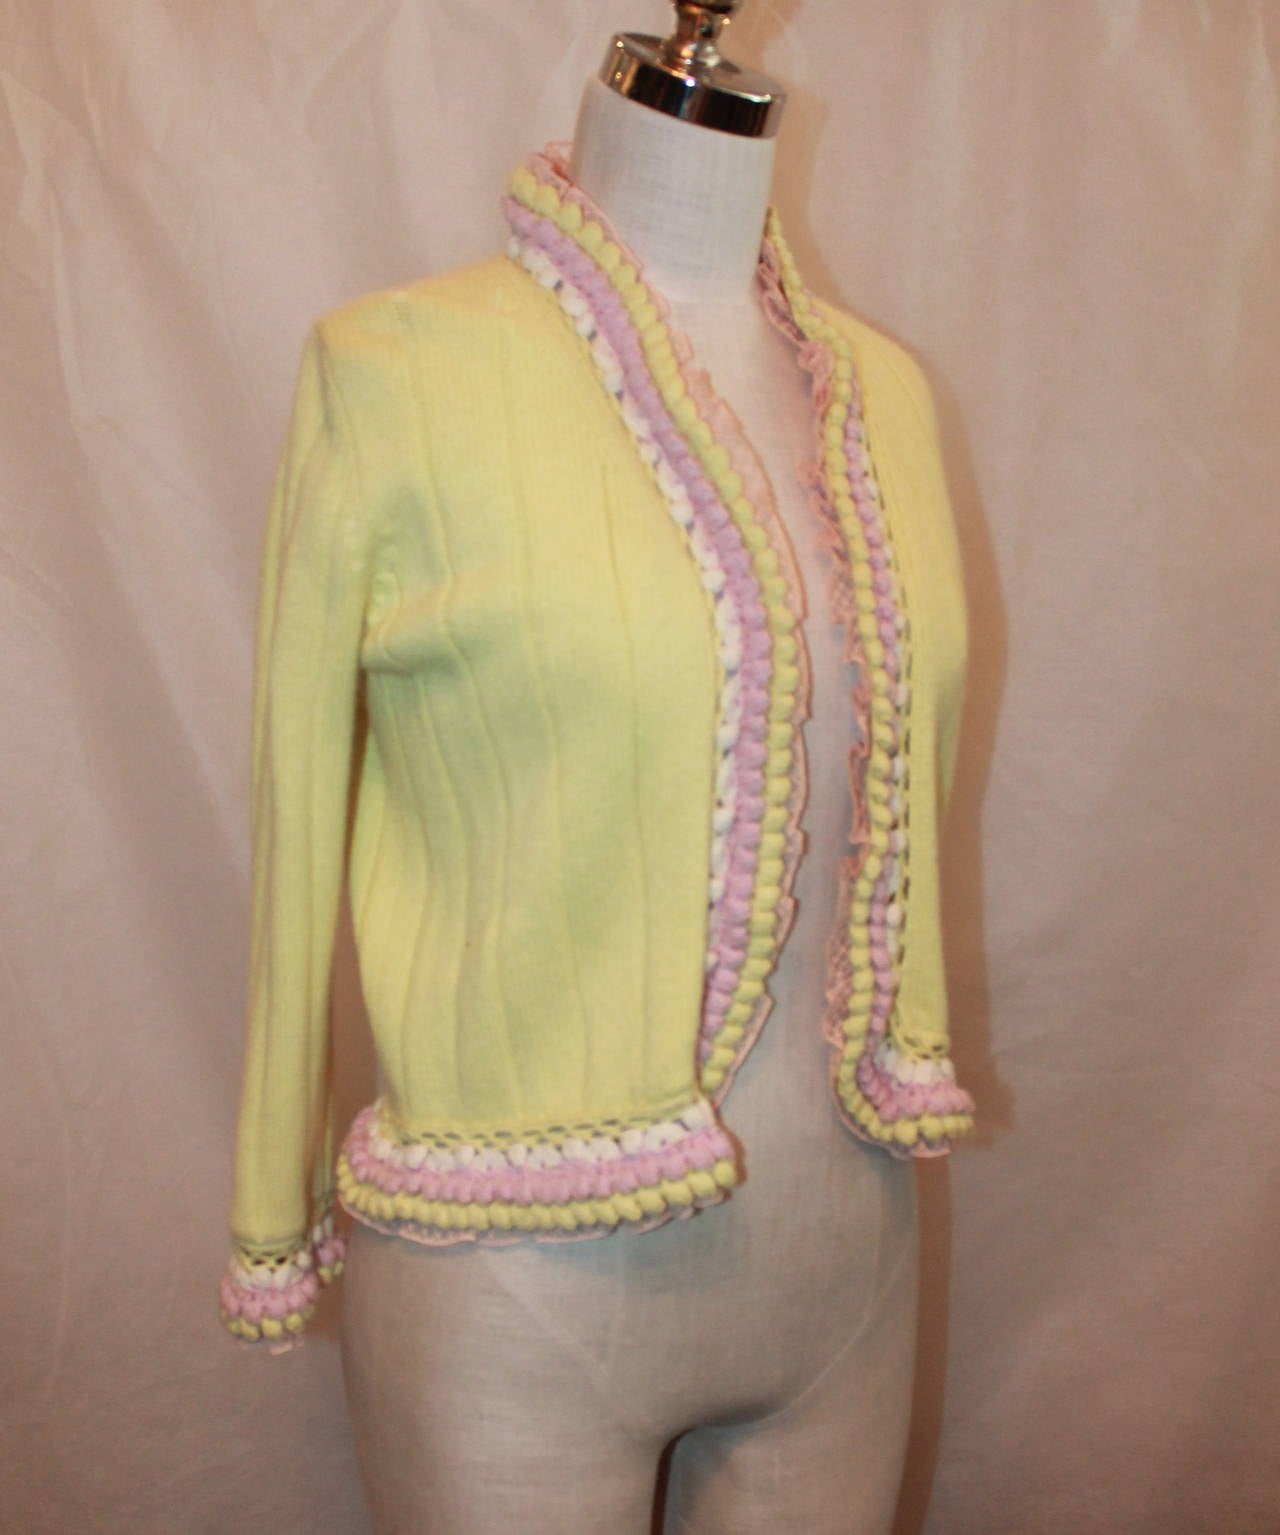 Chanel 2004 Yellow & Pink Cashmere Cardigan - 38. This cable knit cardigan is in excellent condition and has an embellished trim on the edges and sleeve cuffs. 

Measurements:
Bust- about 37